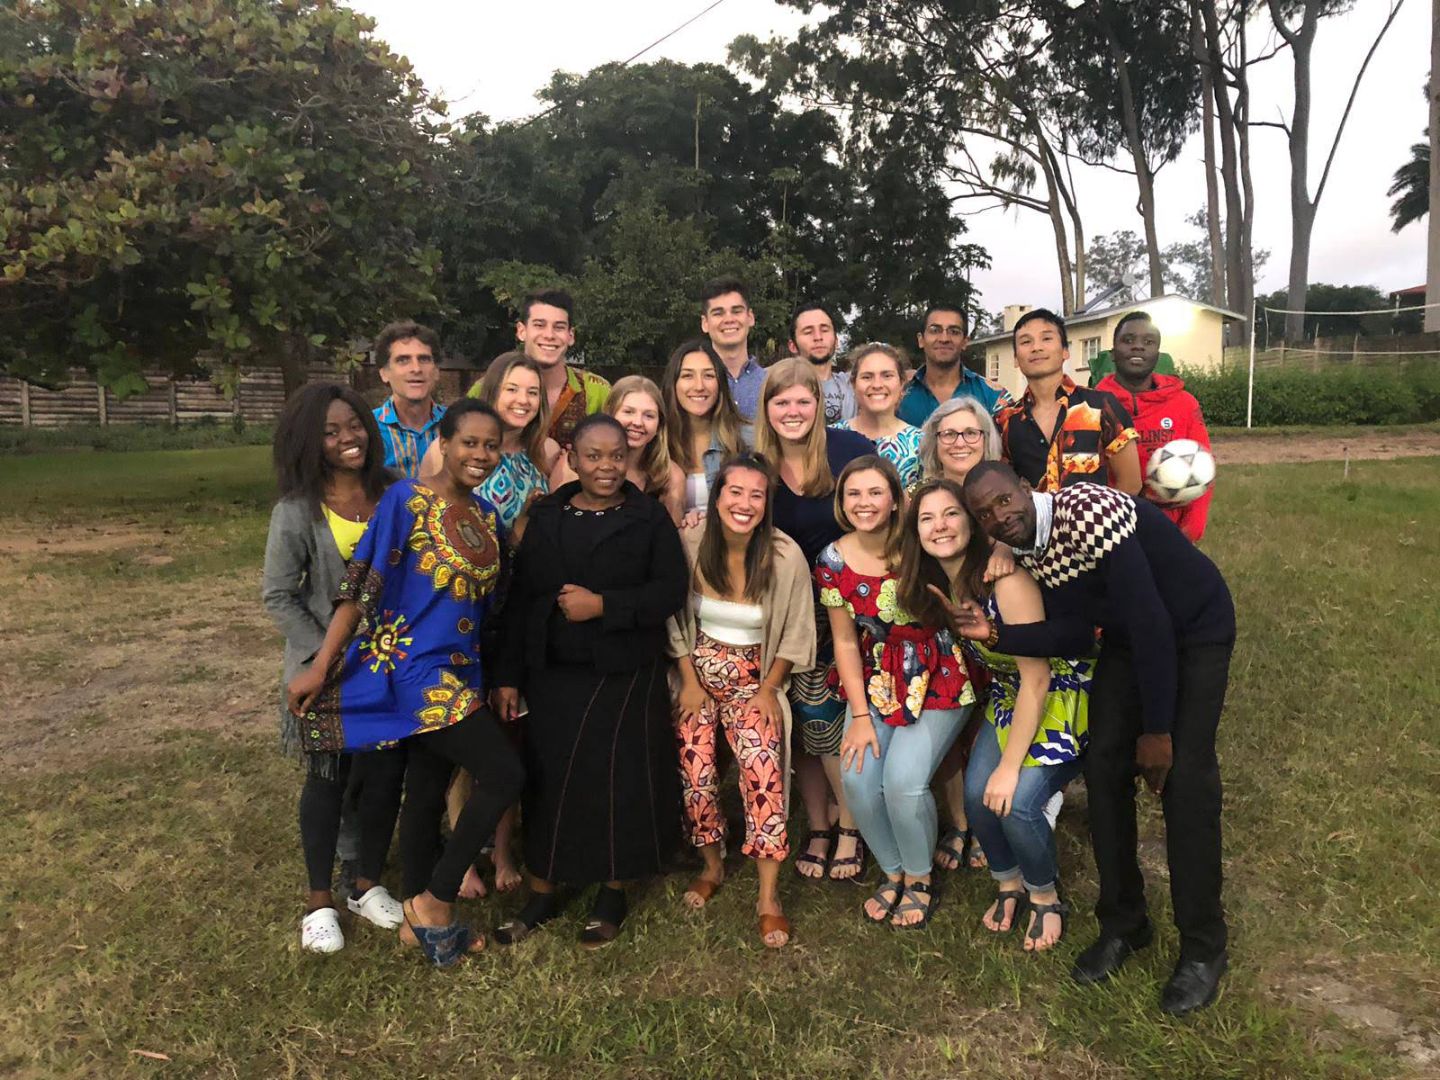 Group shot of students and people from Malawi